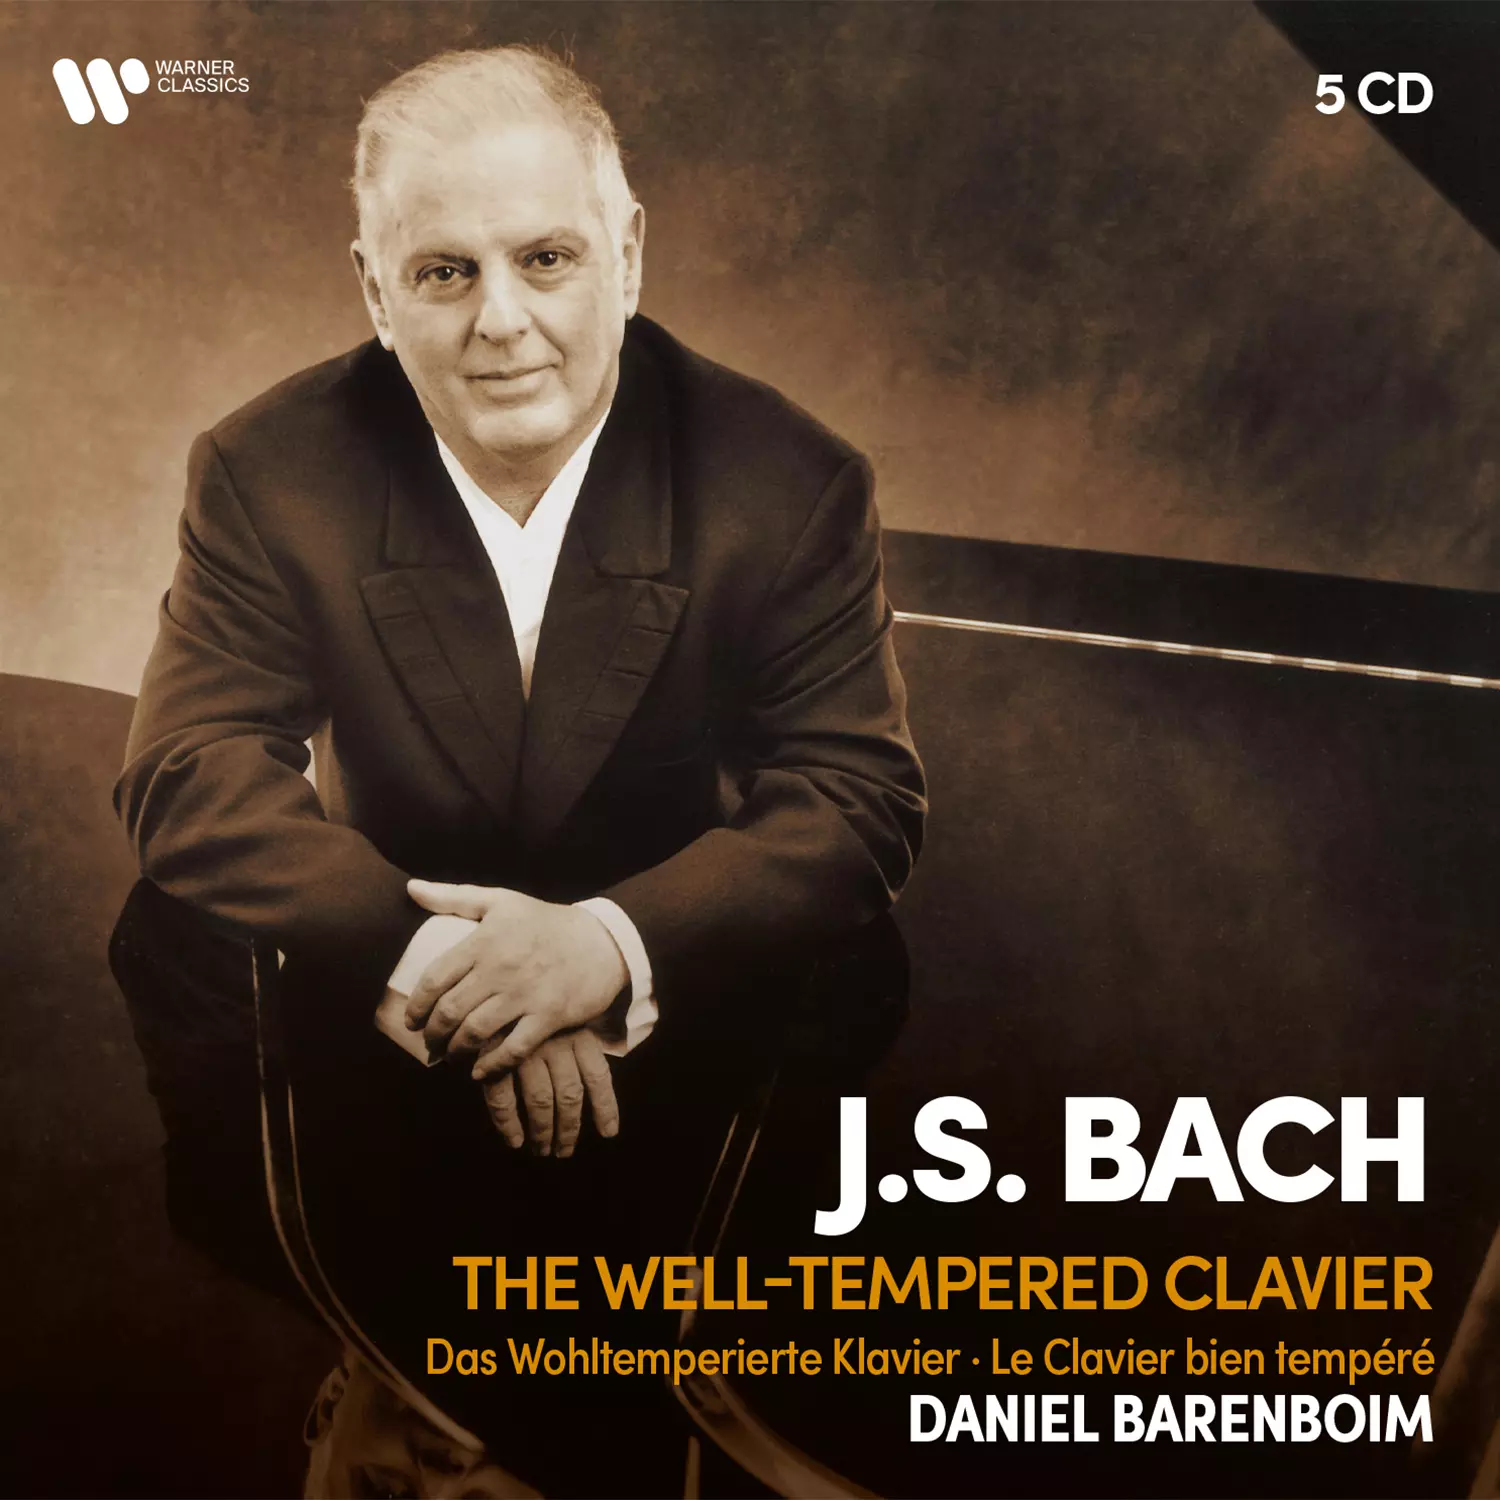 J. S. Bach: The Well-Tempered Clavier